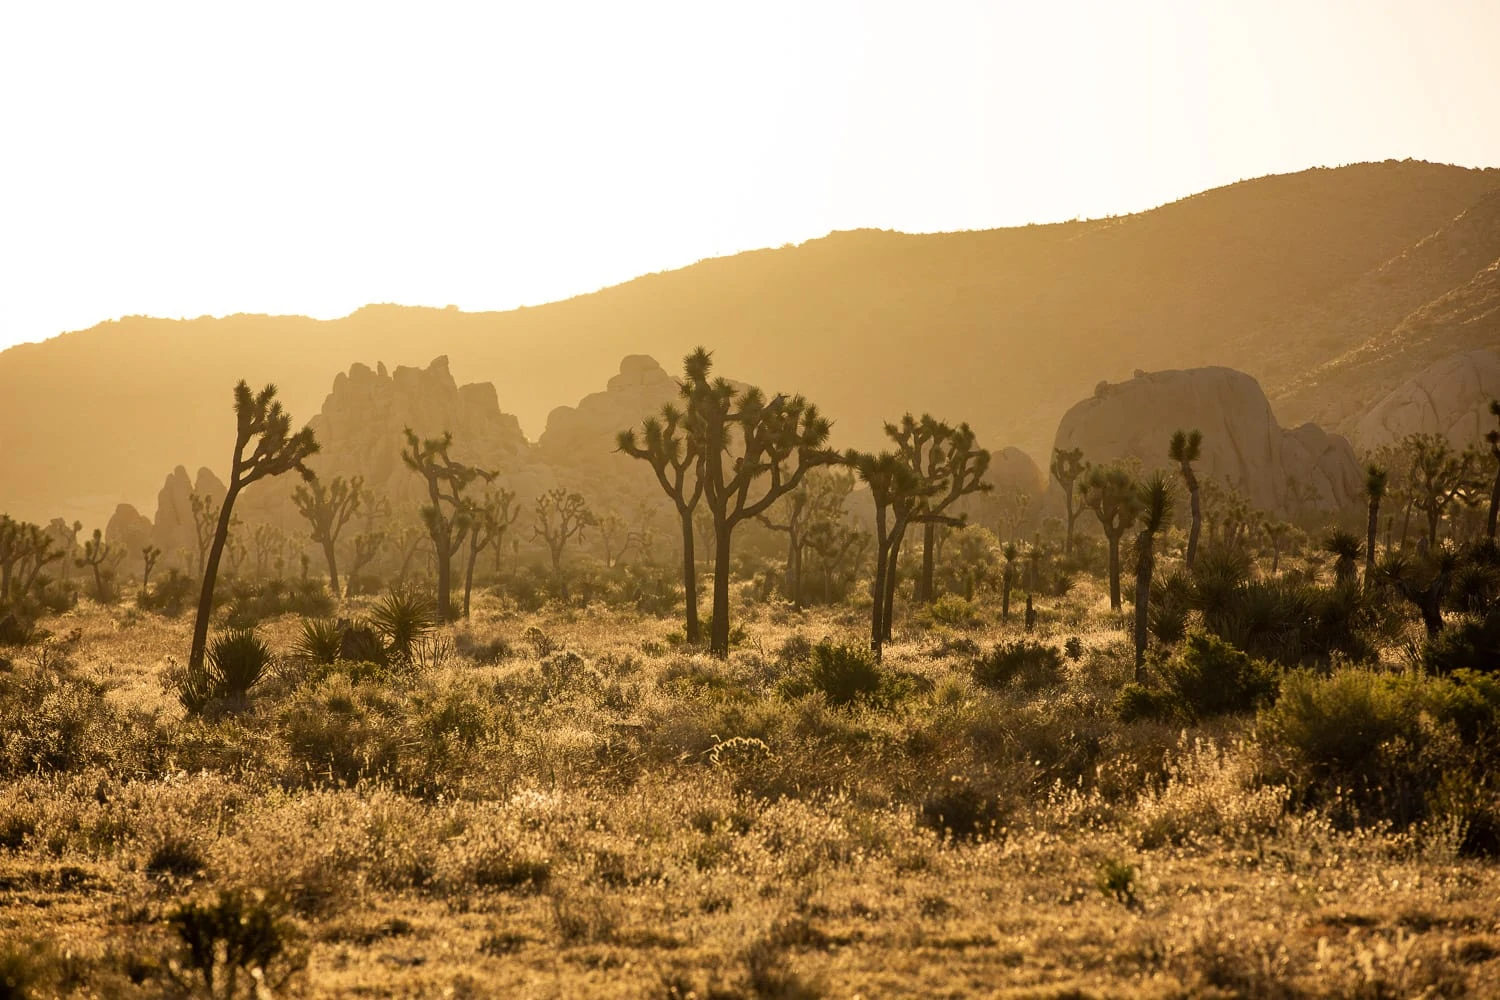 A California elopement location in Joshua Tree national park at sunset.